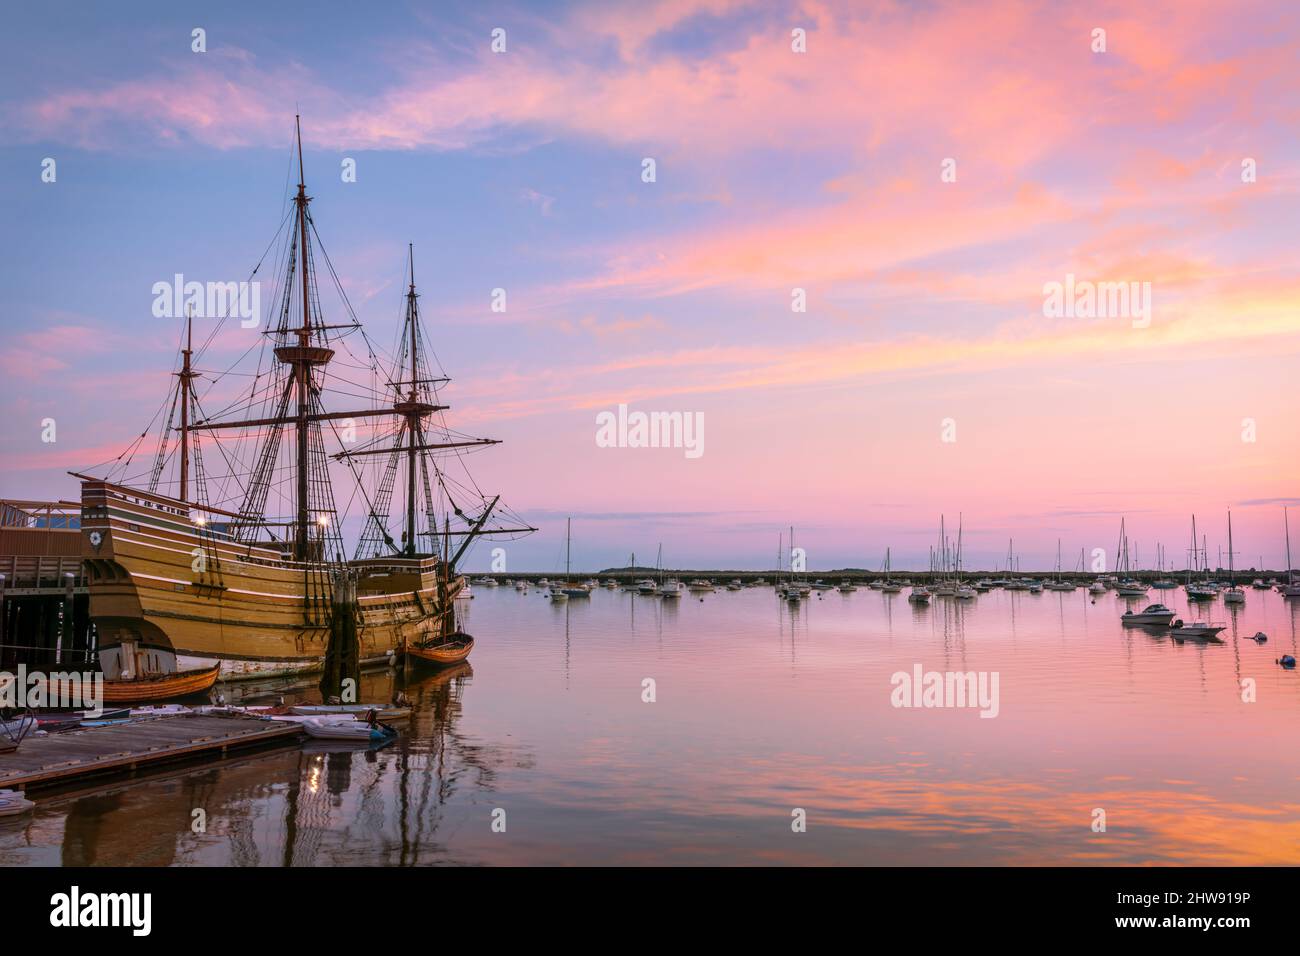 The sun rises over the Mayflower II, a replica of the 17th century Mayflower moored off State Pier in Plymouth, Massachusetts - USA. Stock Photo